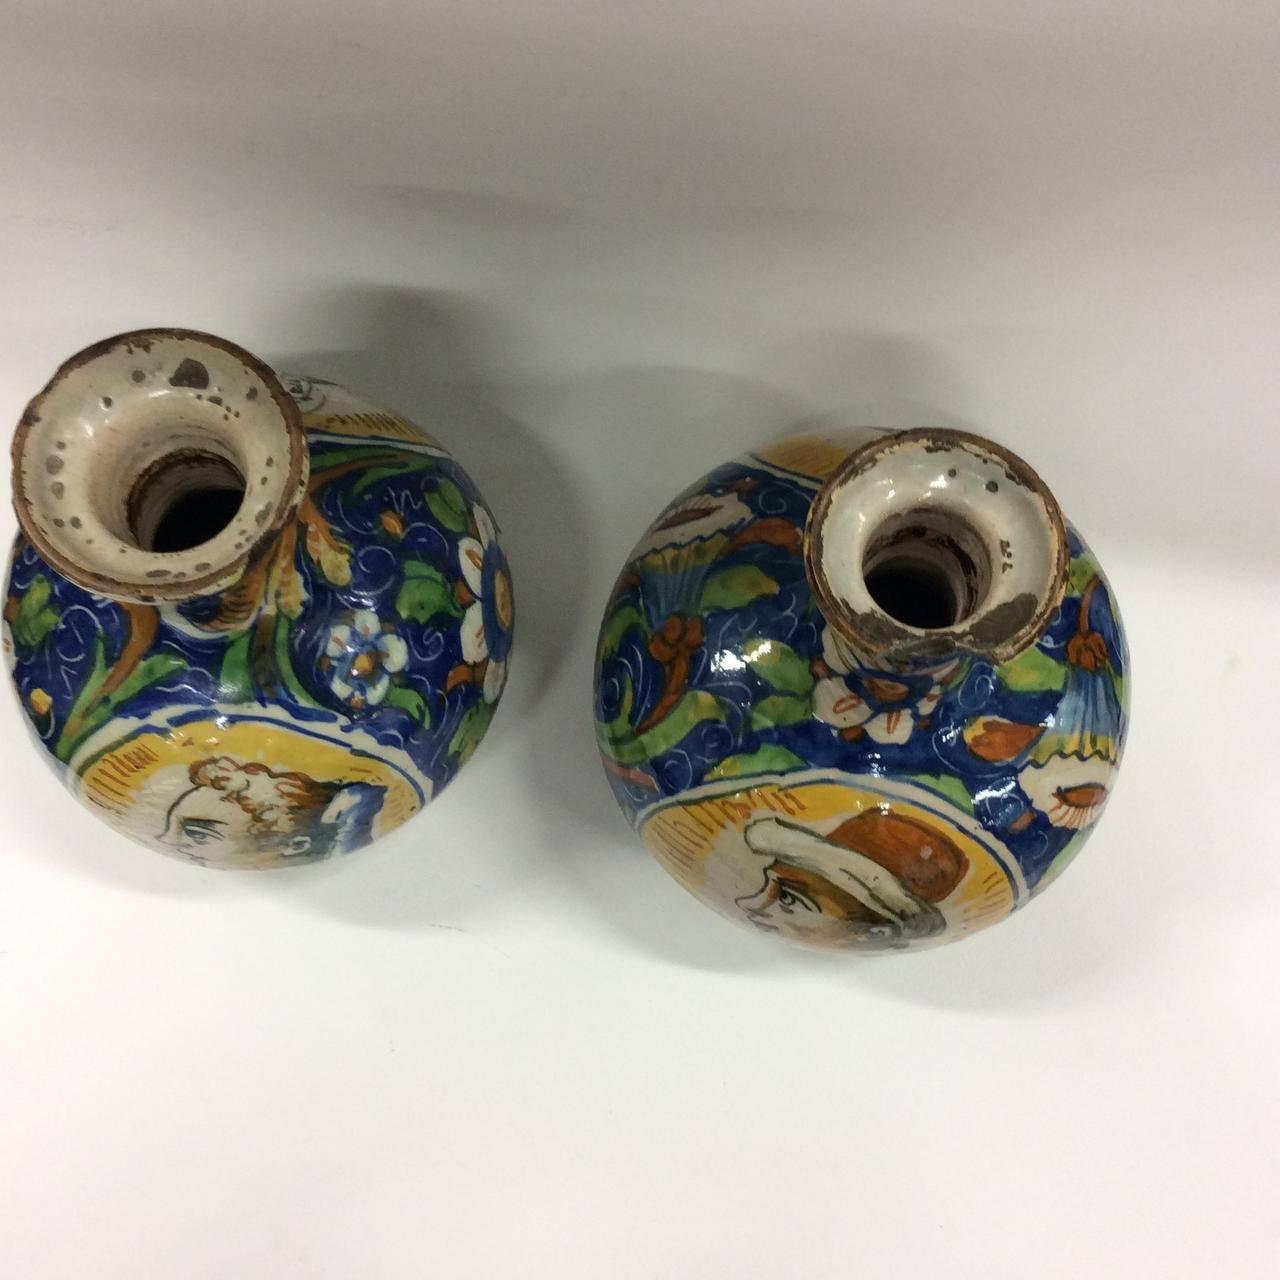 Renaissance Pair of 17th Century Maiolica Vases Featuring Dominican Saints For Sale